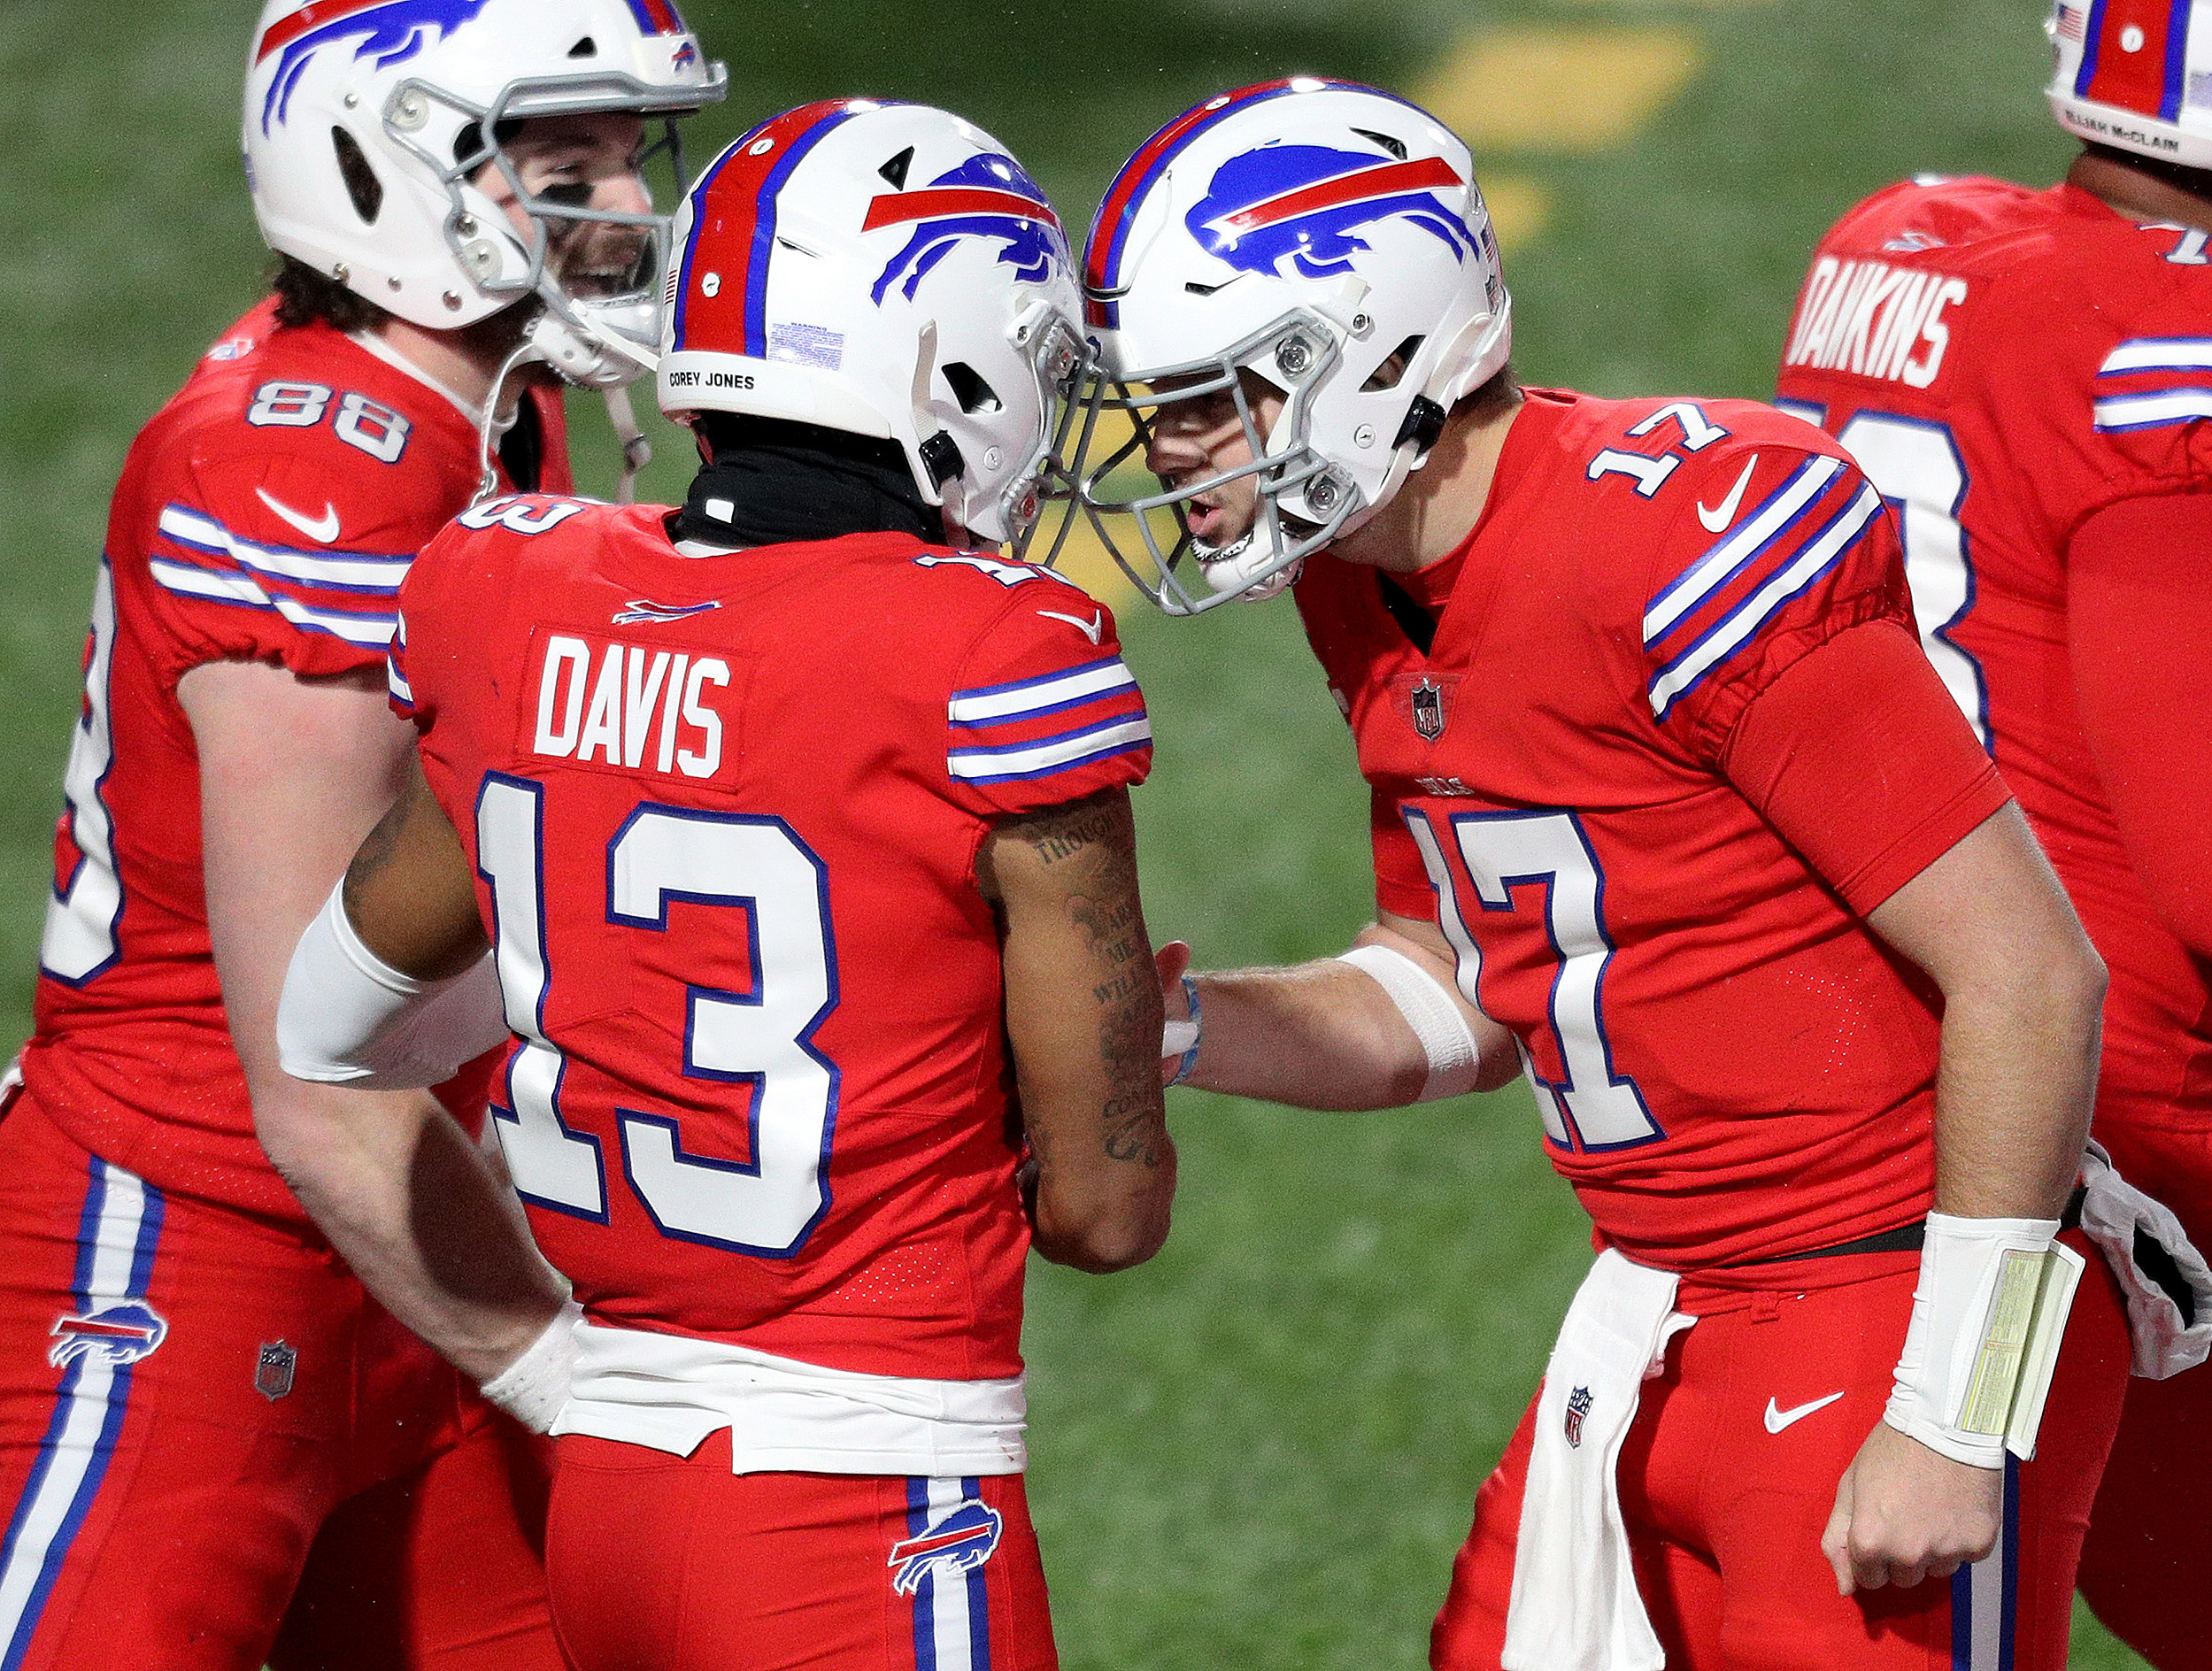 Bills' Davis says he'd have 5 TDs vs. Chiefs with new OT rule